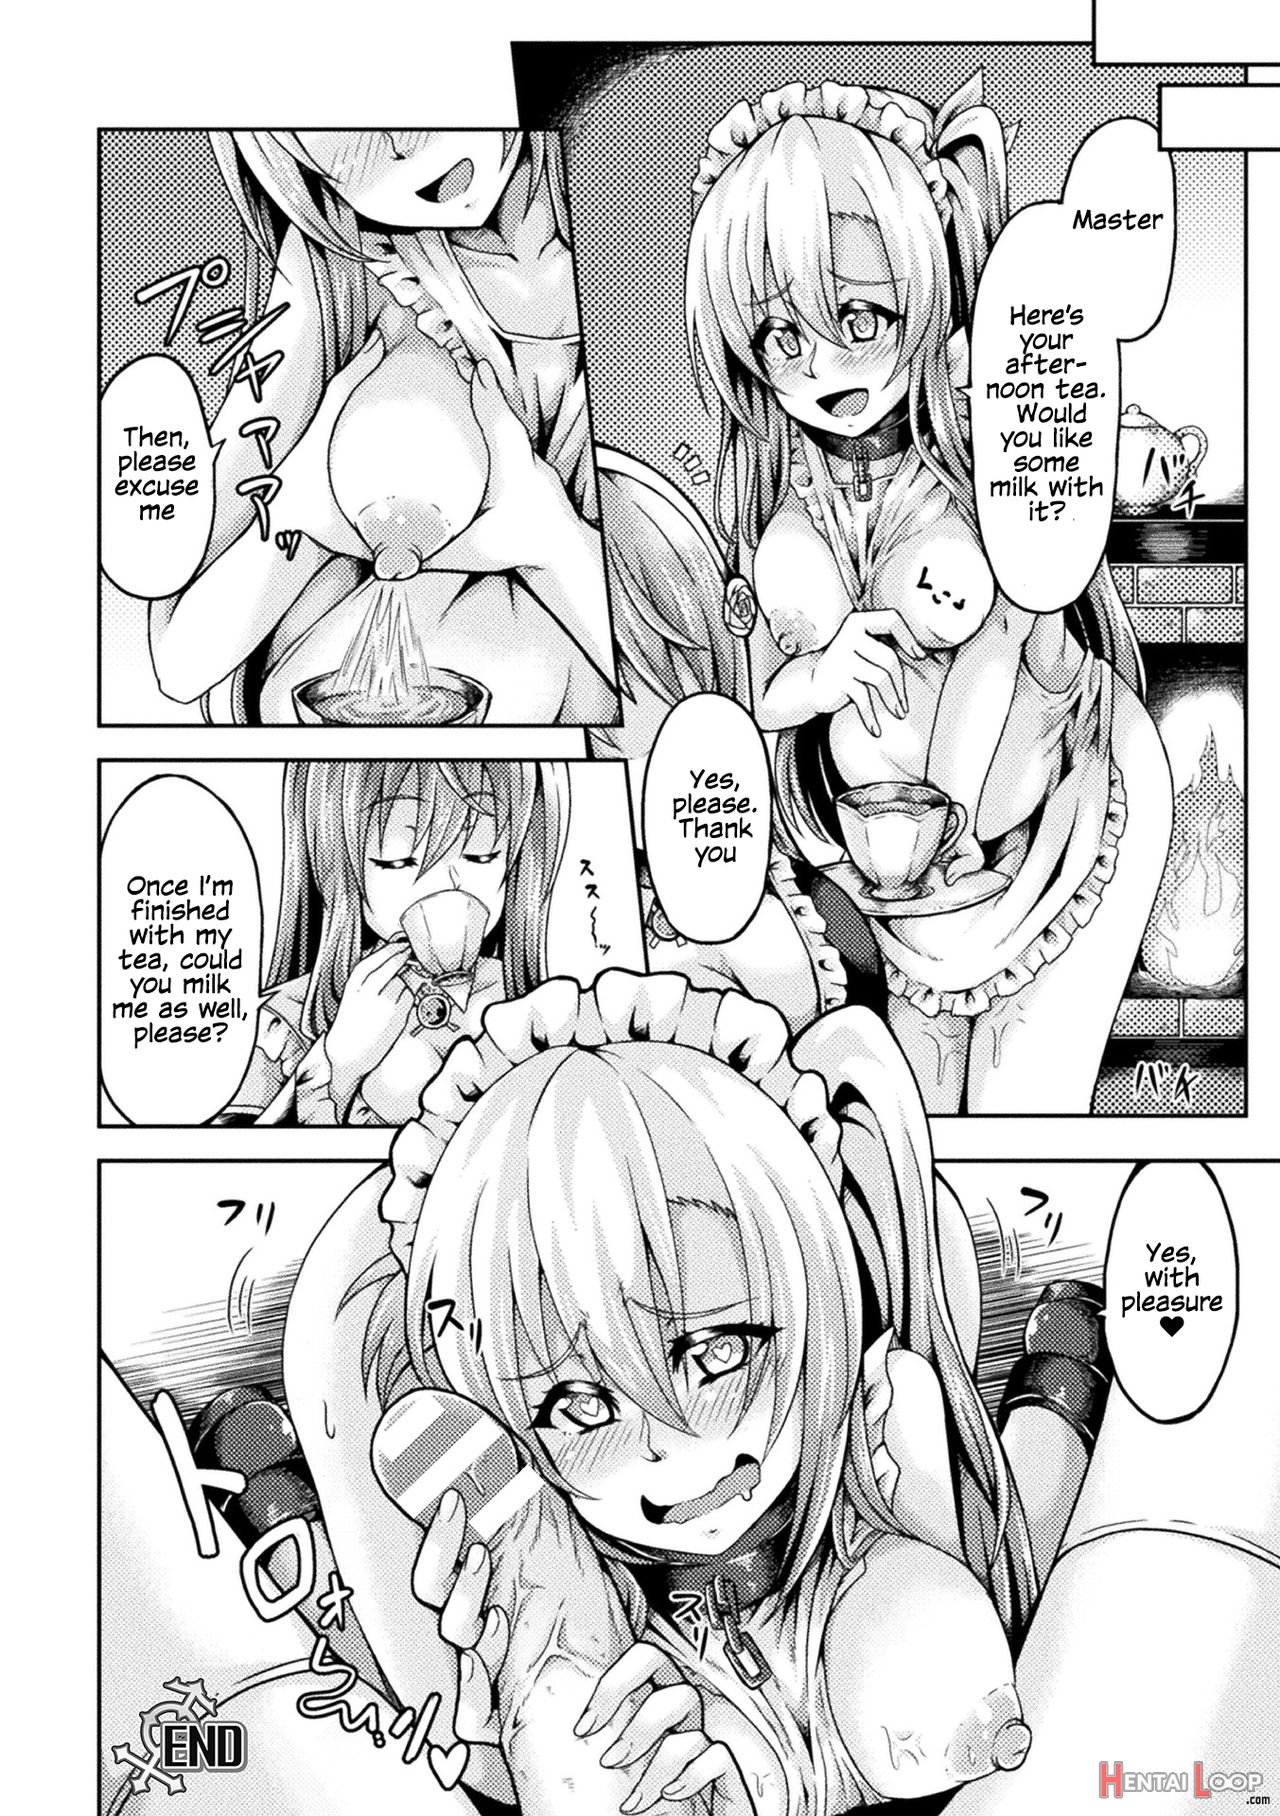 Futanari Girls Forcefully Impregnating Others With A Mating Press! Vol. 1 page 80